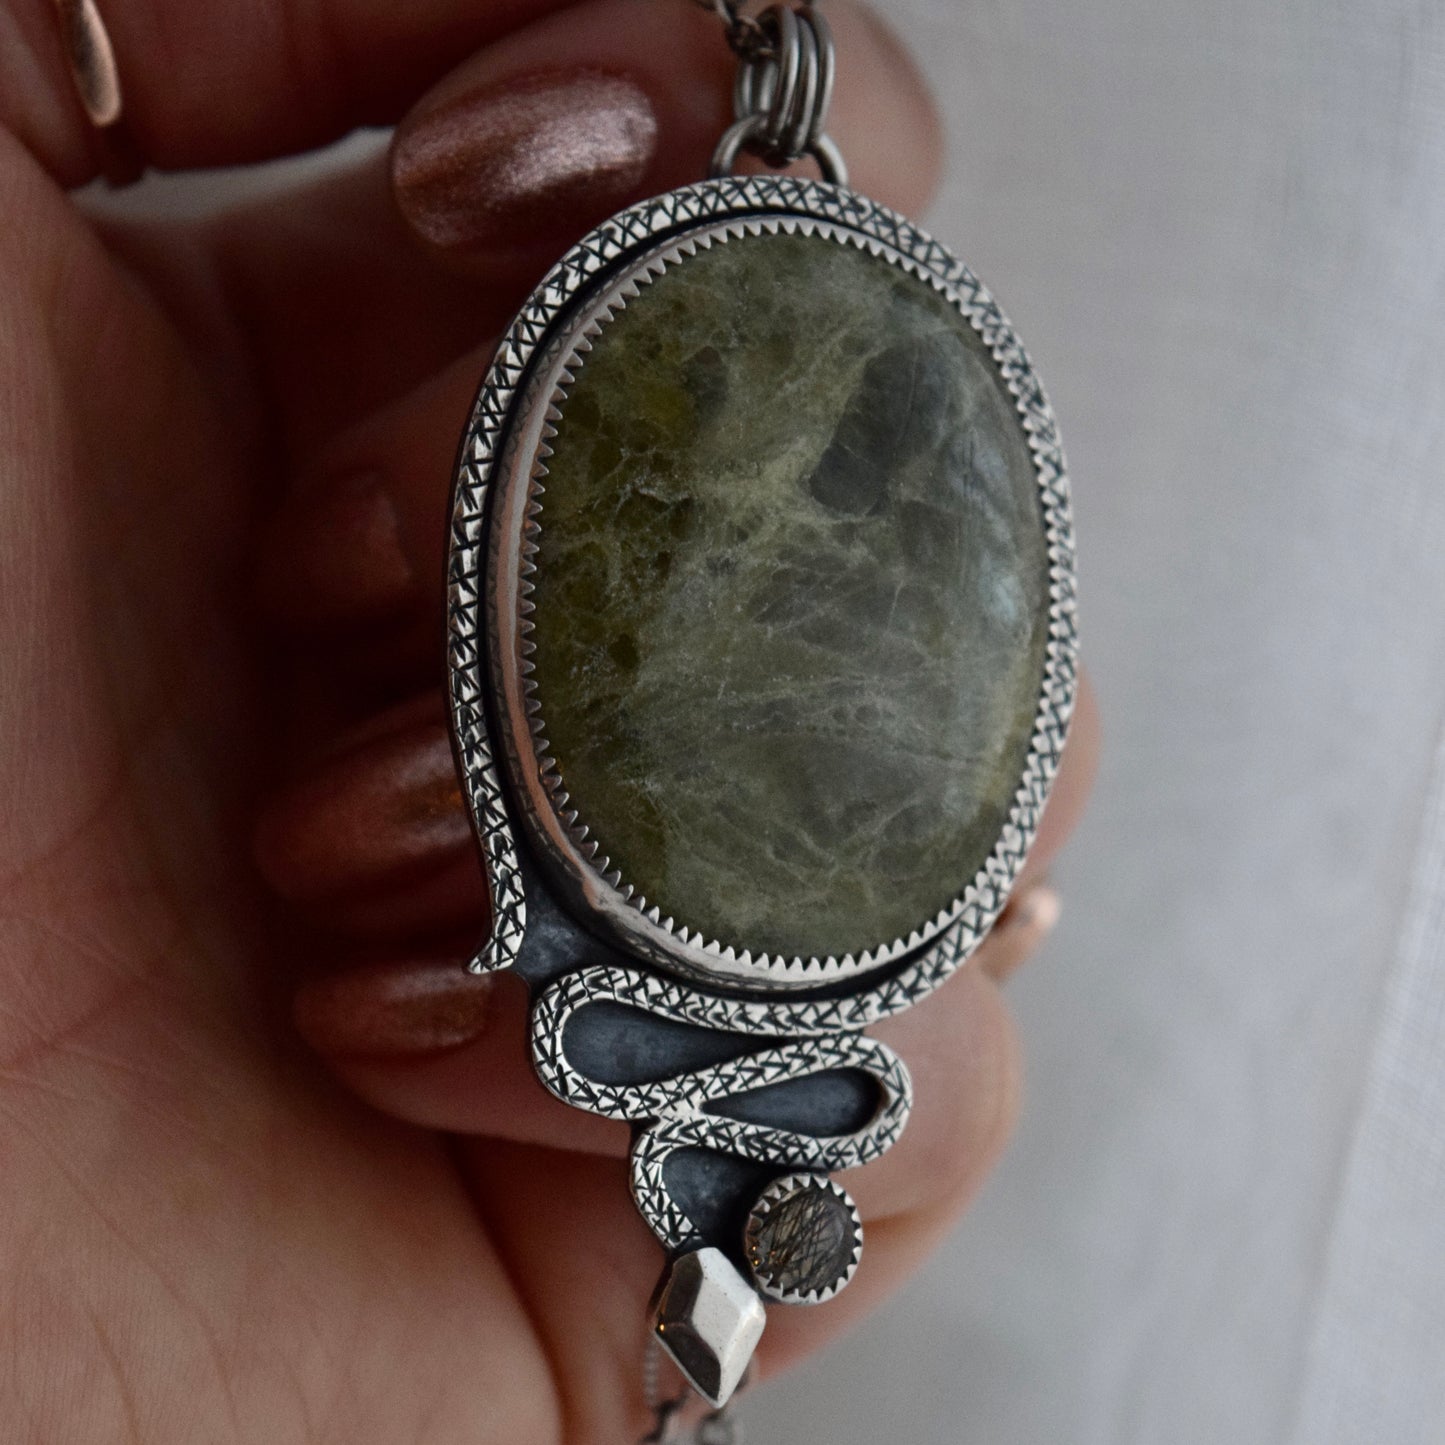 The Serpent House Worry Stone Pendant with Vasonite and Rutilated Quartz